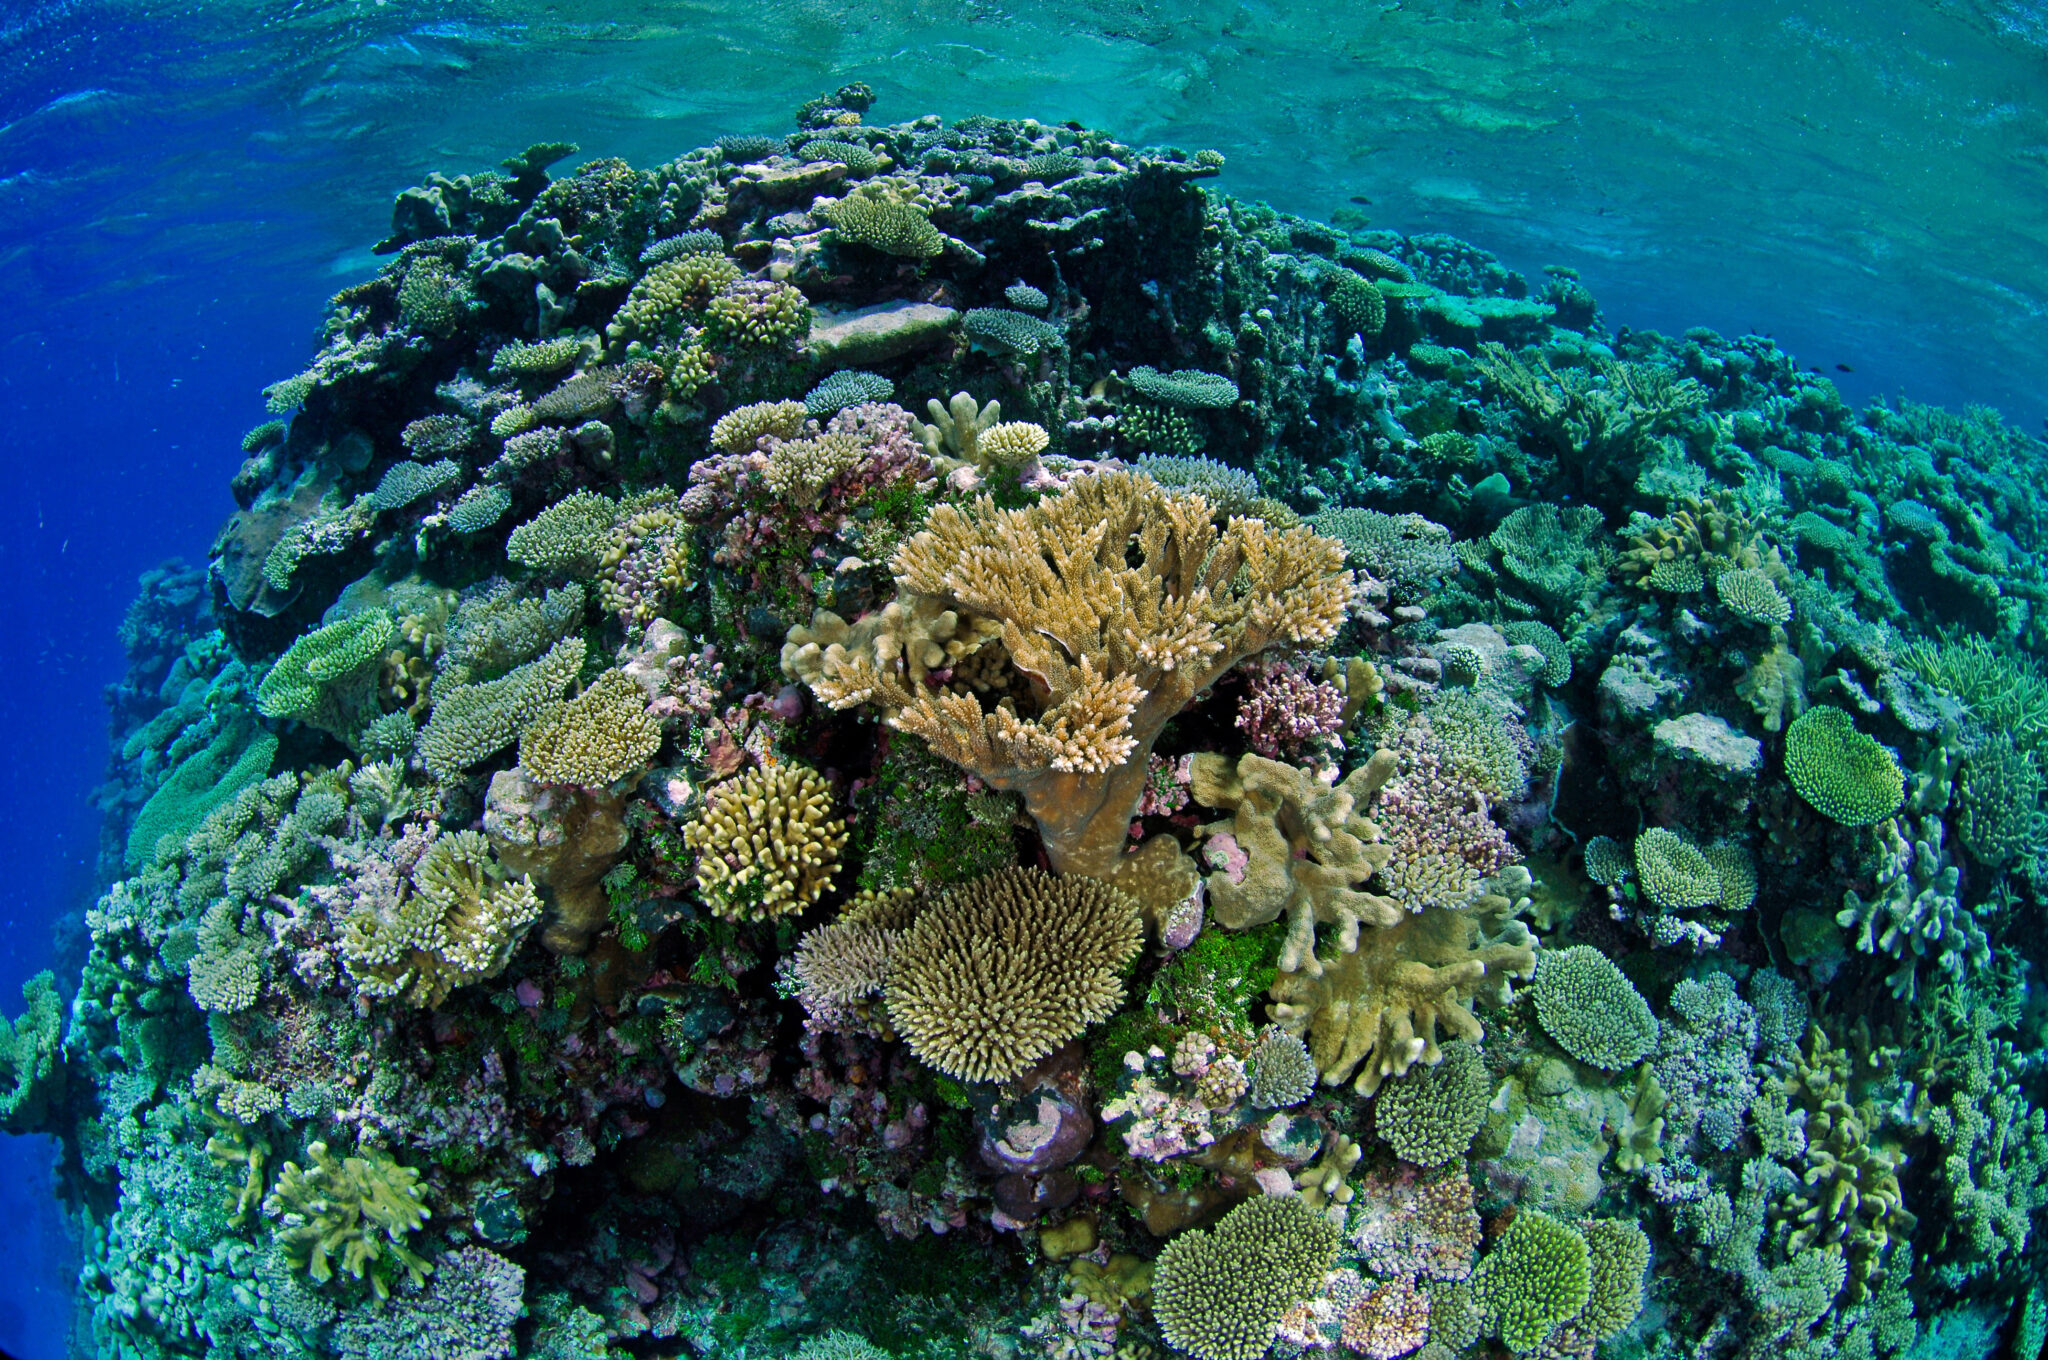 A stunning and colorful coral reef at Bikini Atoll, which is also one of the world's best technical diving liveaboard trips